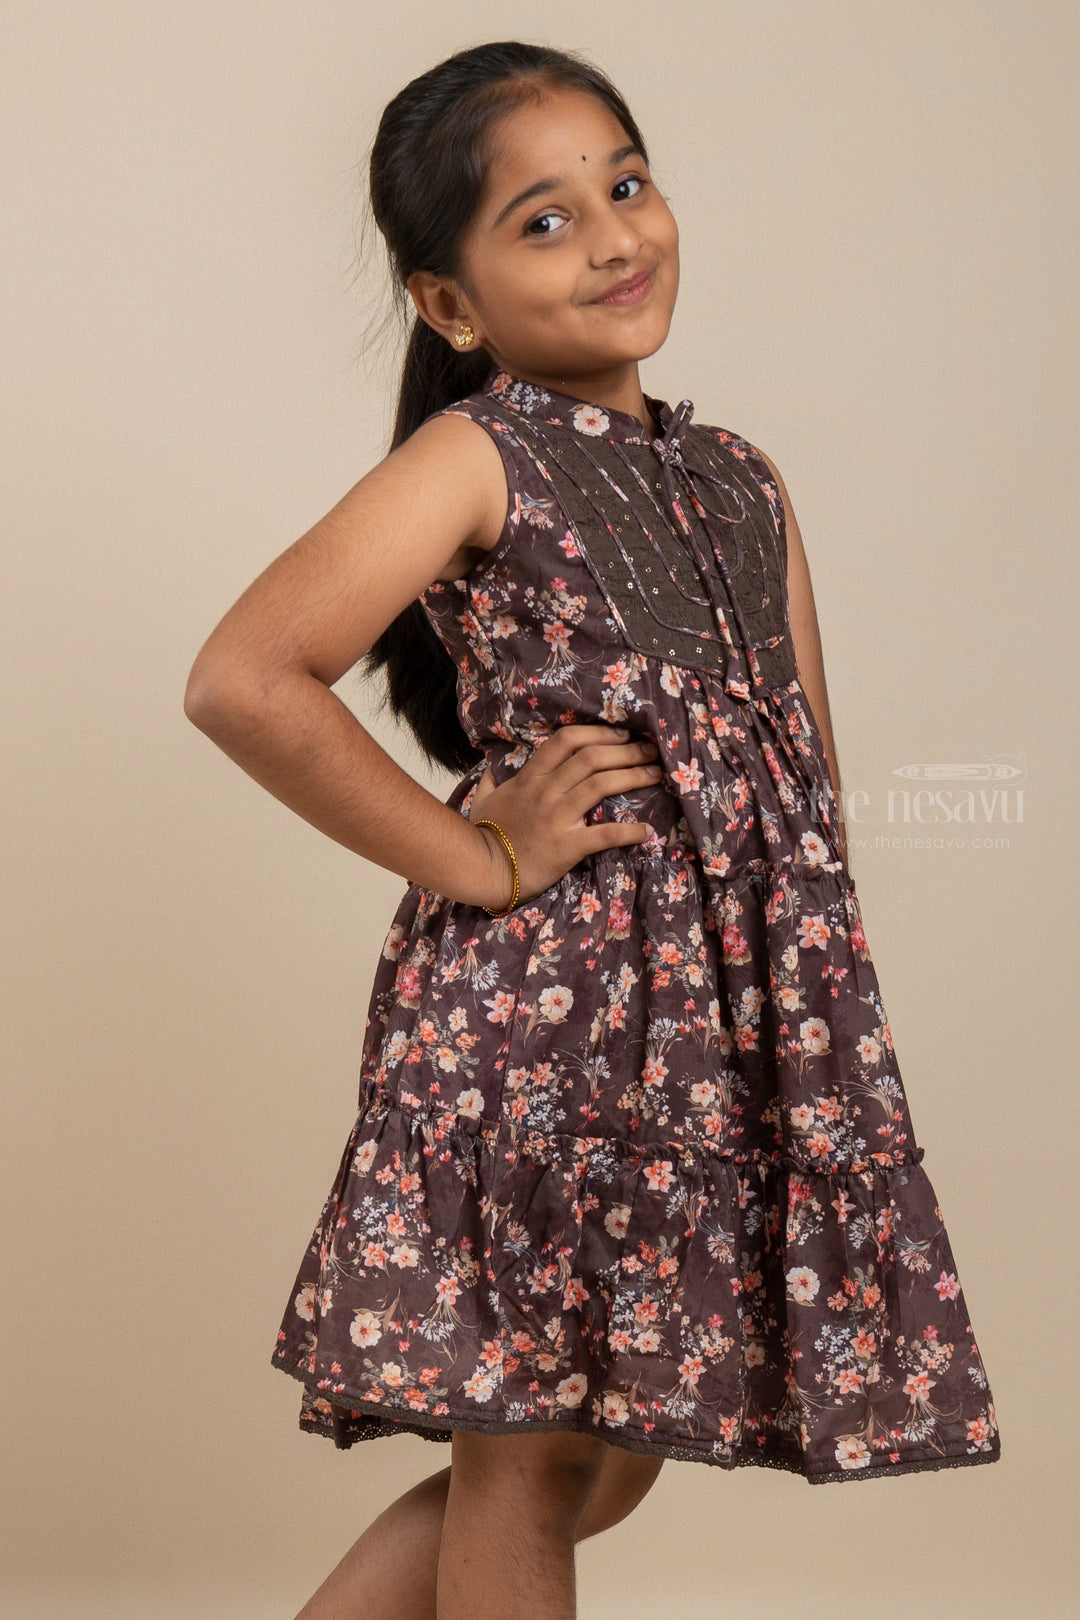 The Nesavu Girls Cotton Frock Brown Floral Designer Collared Frock With Neck Tie For Girls Nesavu Stylish Collar Cotton Gown For Girls | Designer Wear Pattern Ideas | The Nesavu